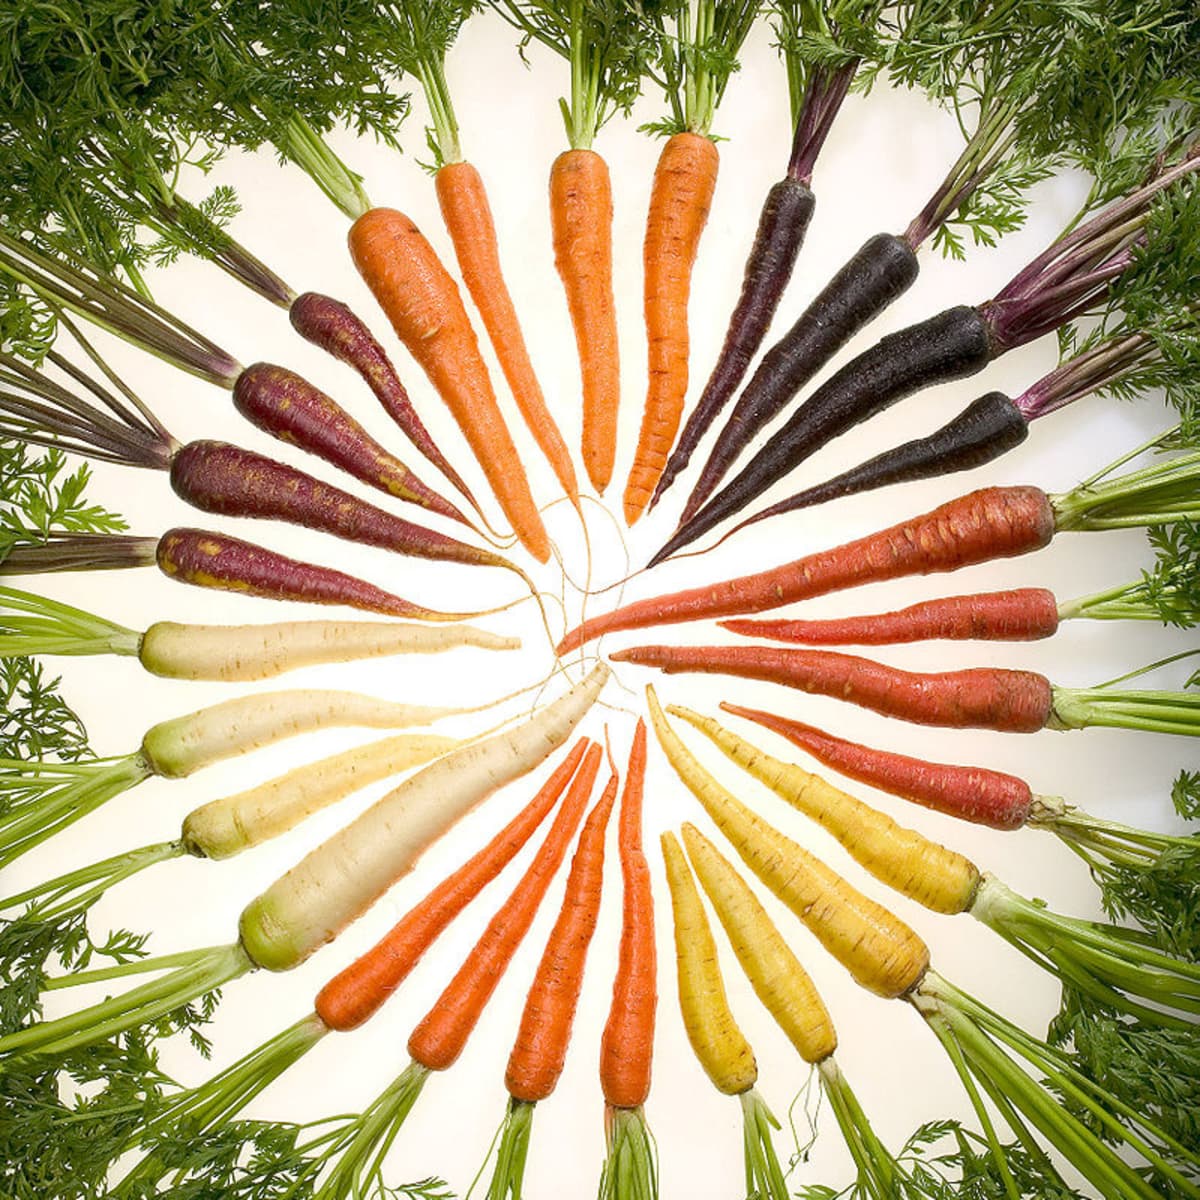 What's up, Doc? Happy International Carrot Day! Studies show that eating 2-4 raw carrots a week decreases your risk of colon cancer by 17%! That's 1/4 a cup a day to protect you against a big pain in the butt! #internationalcarrotday #crunch #coloncancer